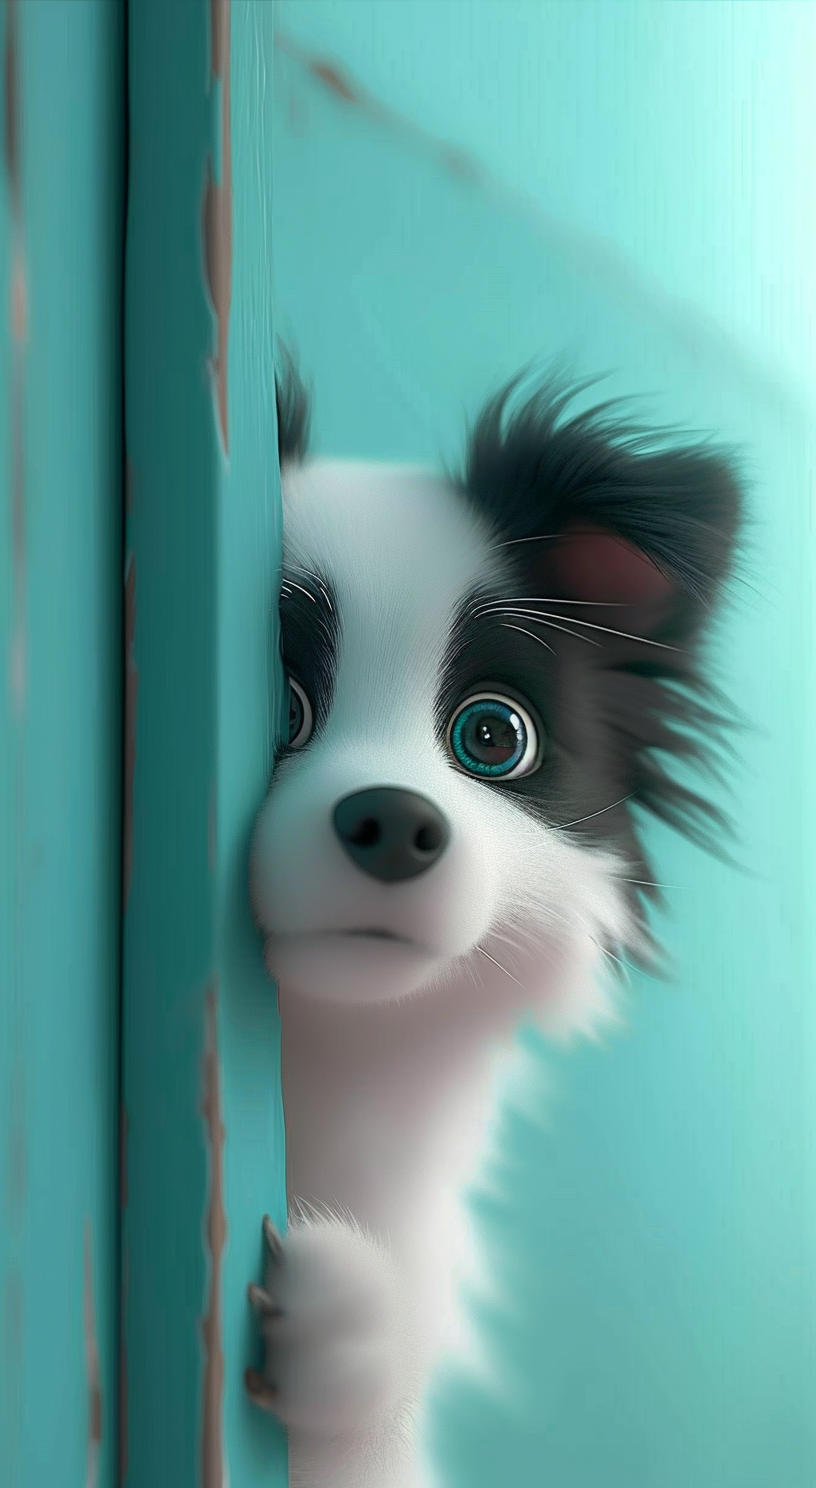 Experience the charm of our playful white puppy peeking from a vibrant turquoise door.